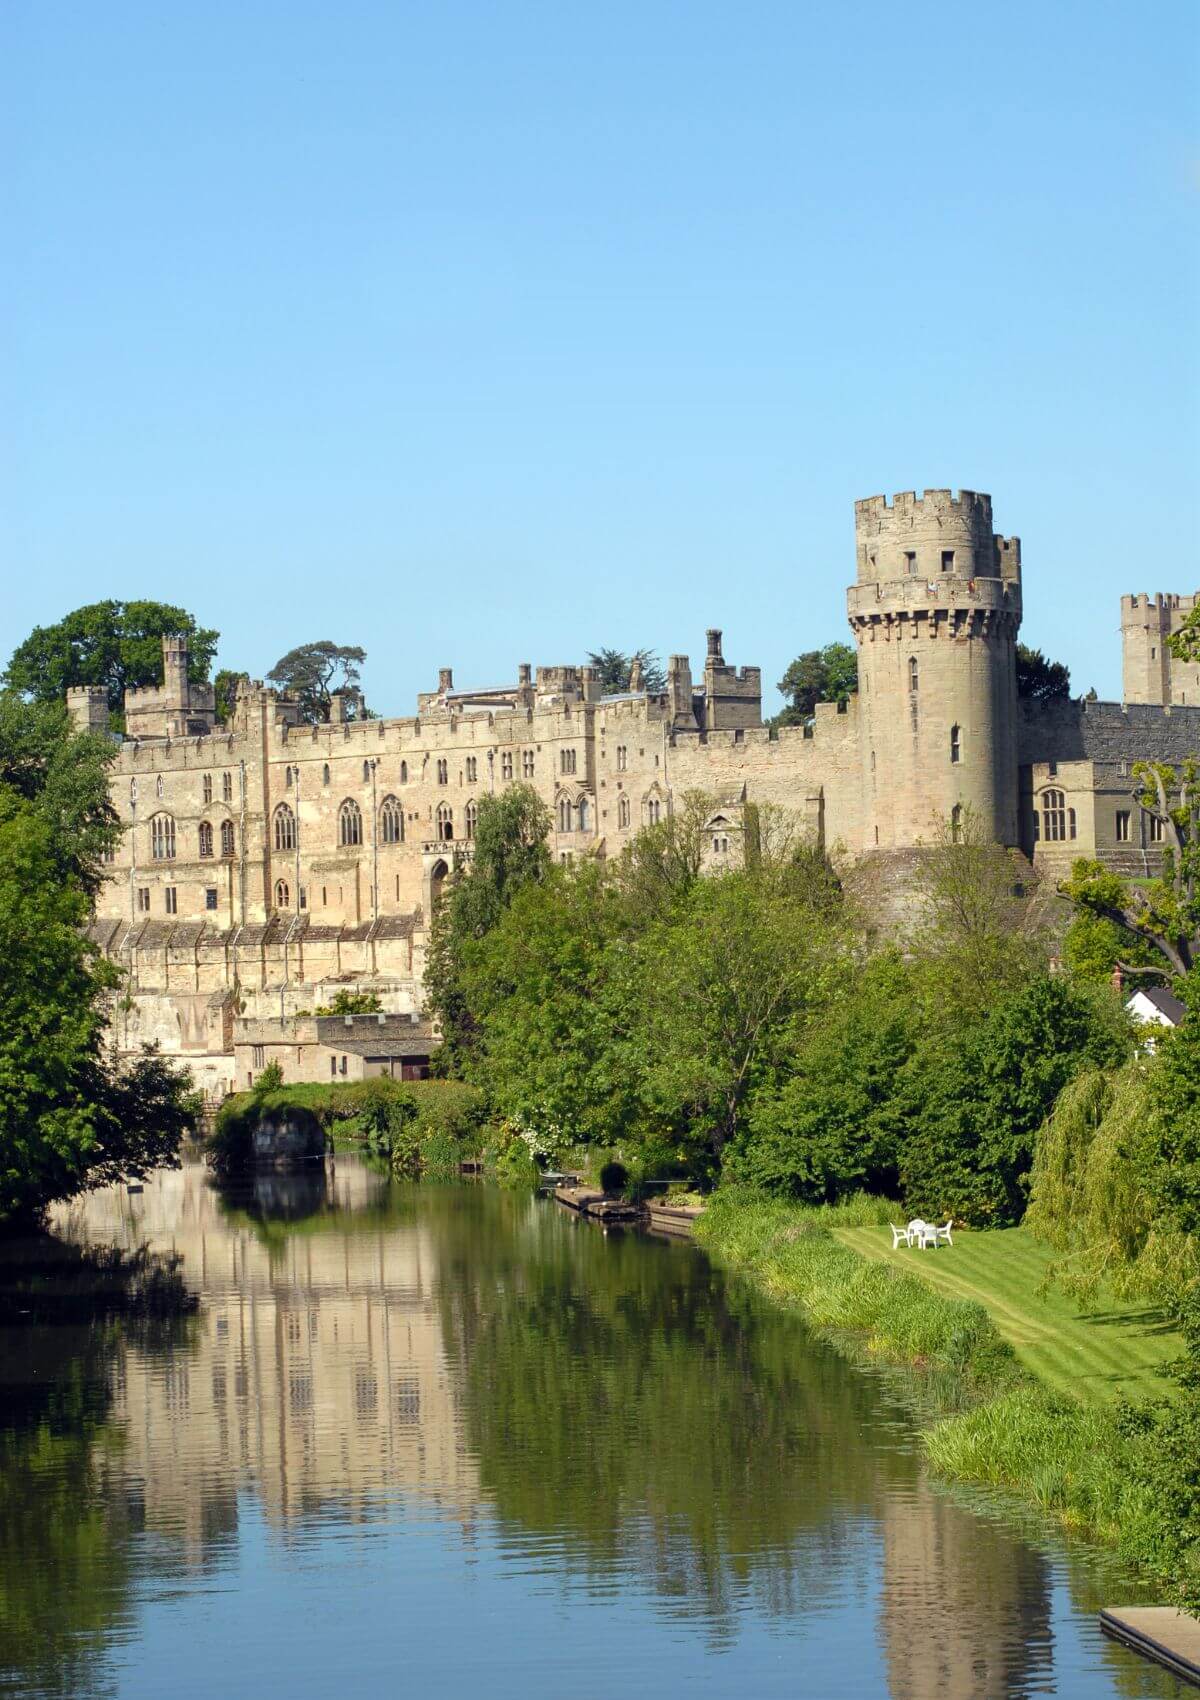 Warwick Castle is one of England's best-preserved medieval castles